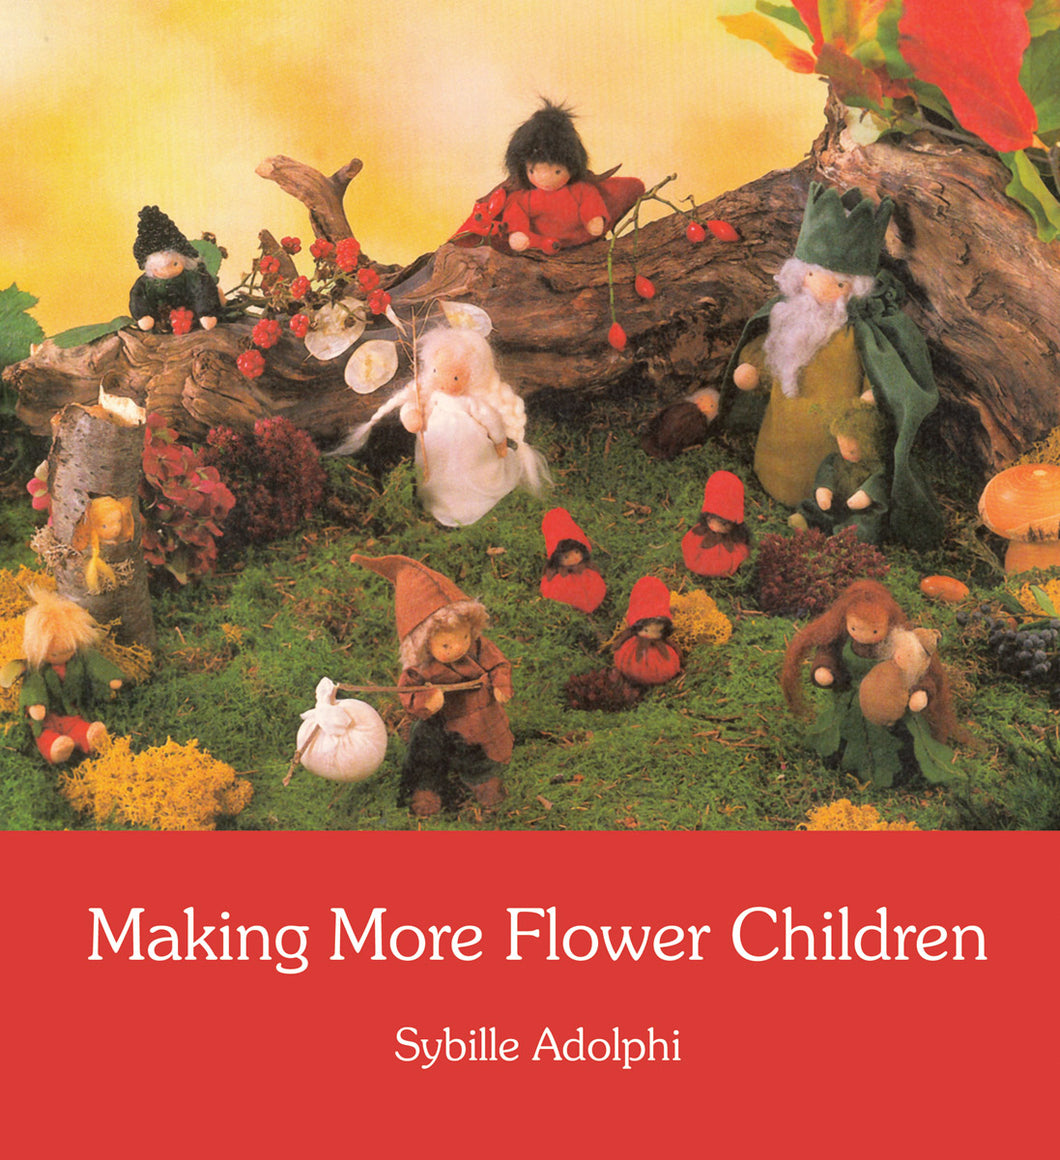 <i>Making More Flower Children</i> by Sybille Adolphi